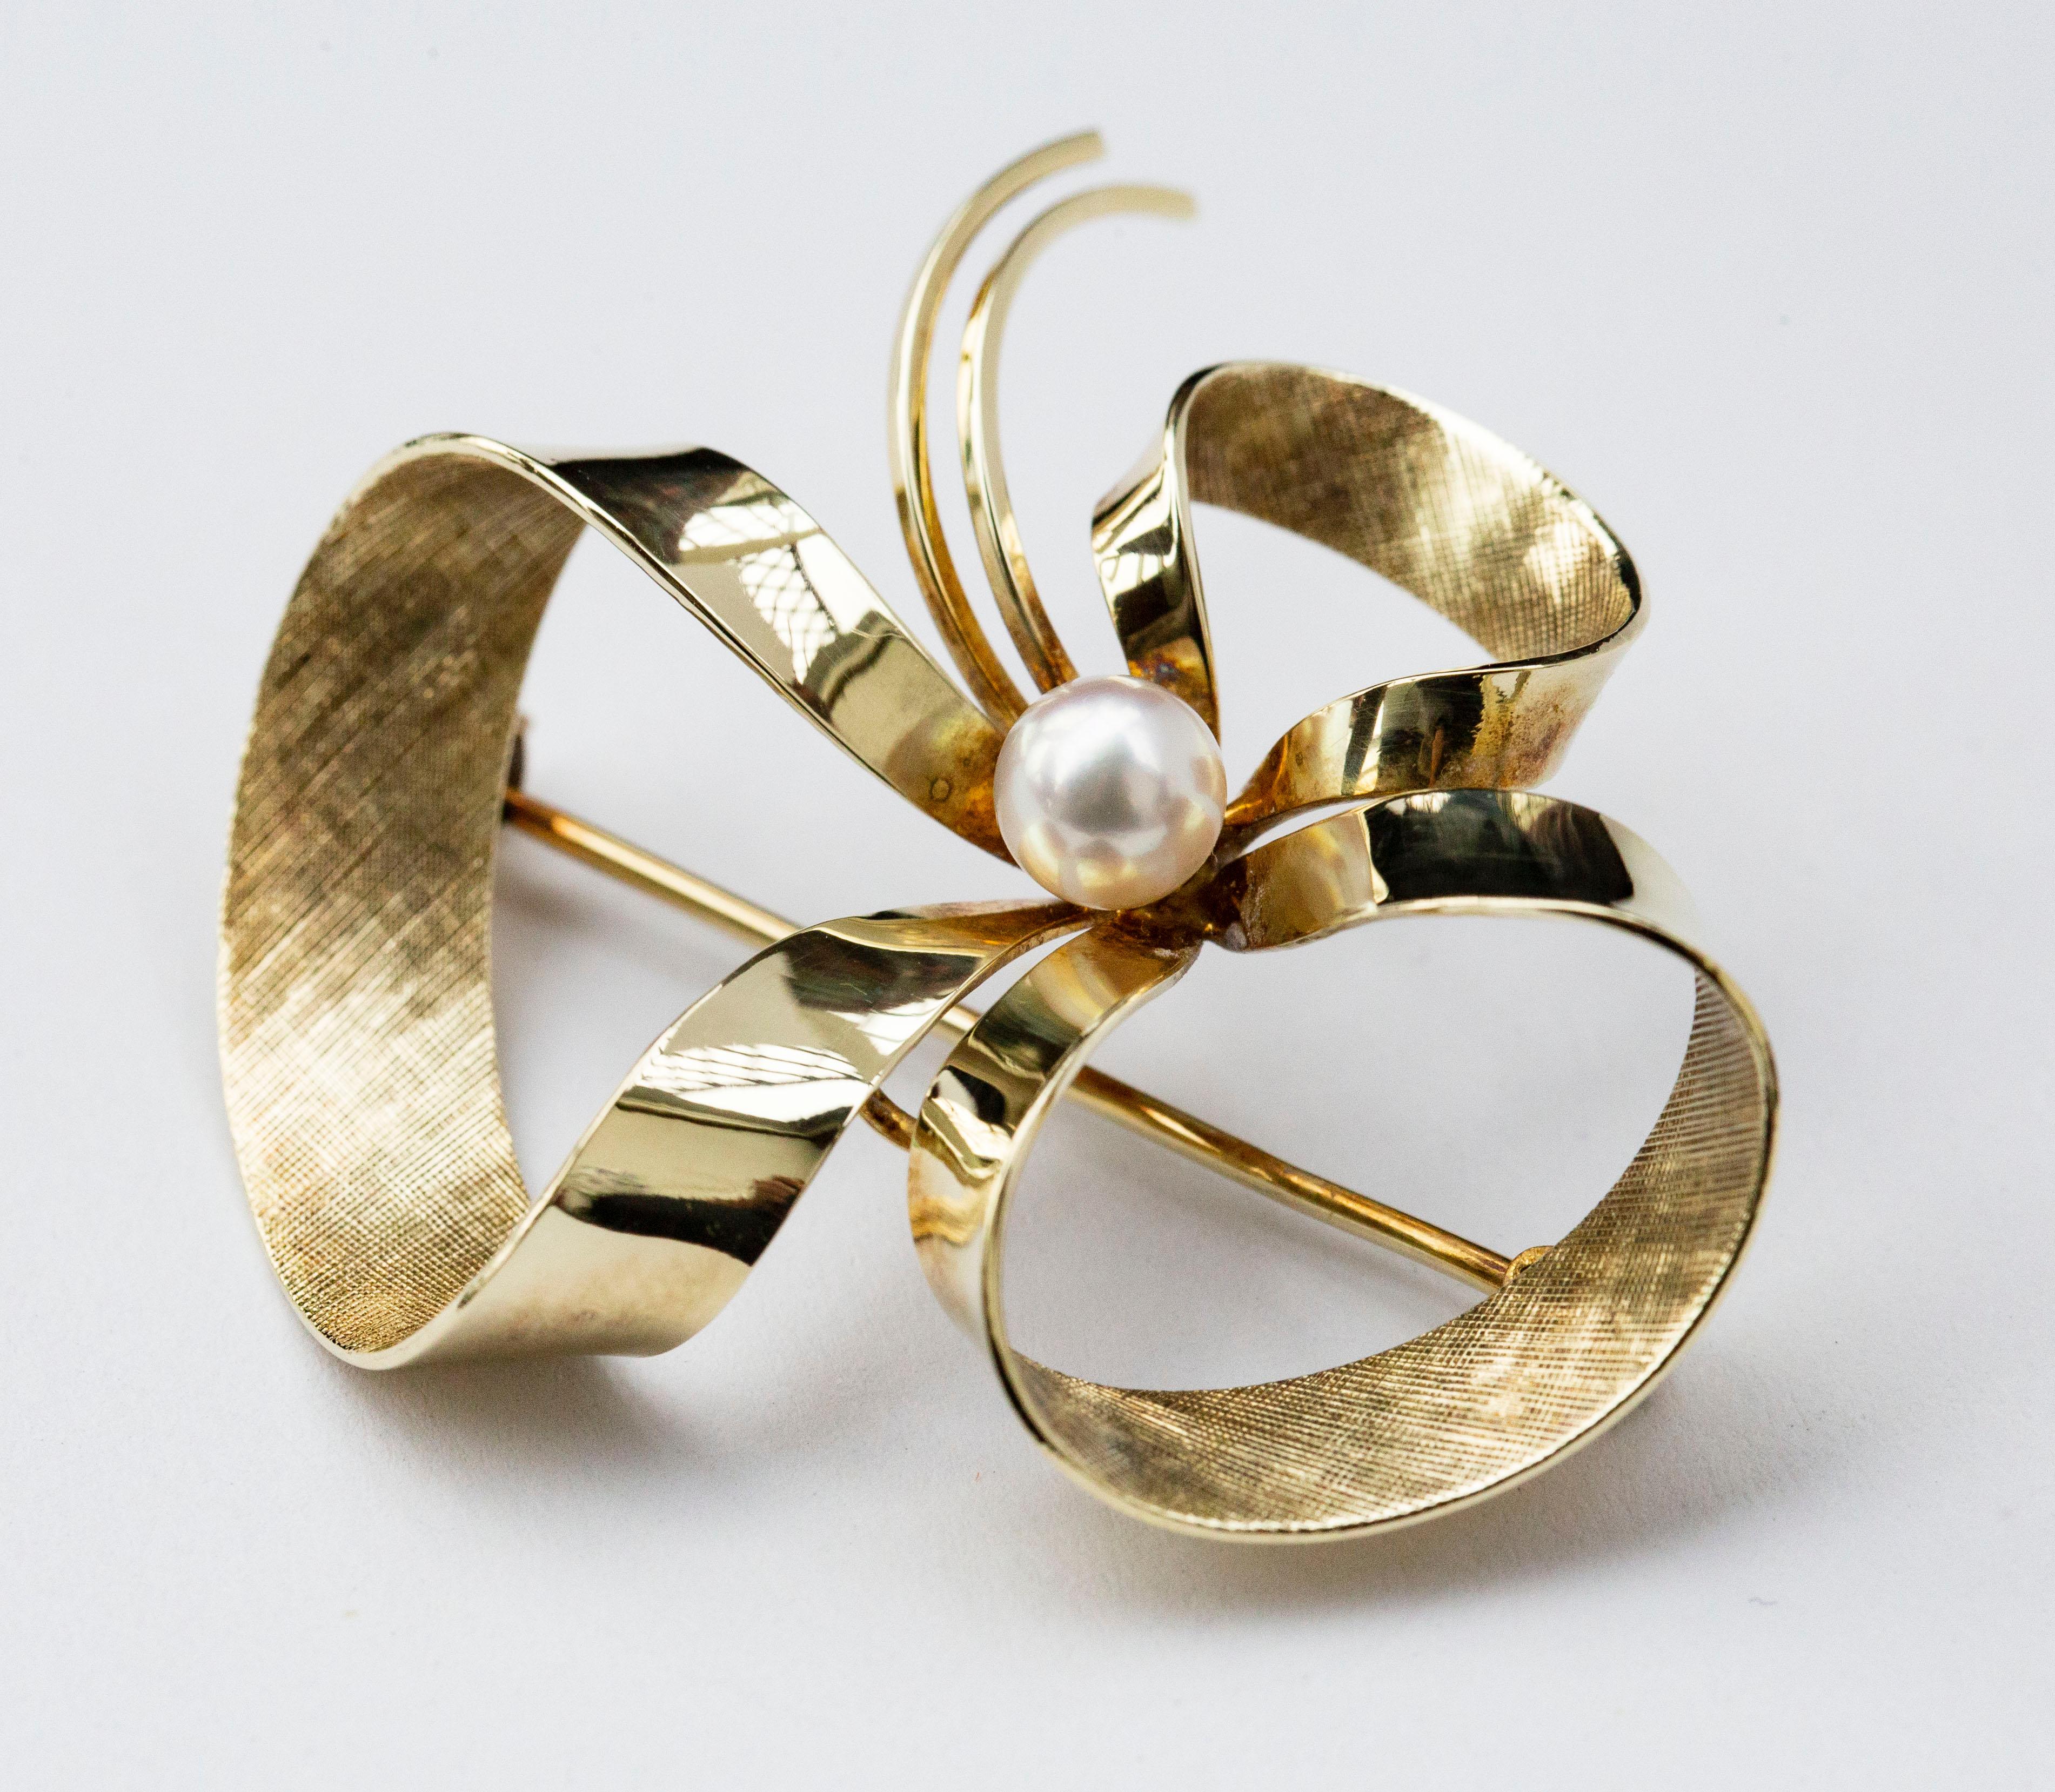 A vintage bow brooch crafted in 14 karat yellow gold. The outside surface of the bow is made of smooth gold while the inner surface is textured and matted. The brooch is set with a cultured pearl in the centre. The brooch closes with a roll-over